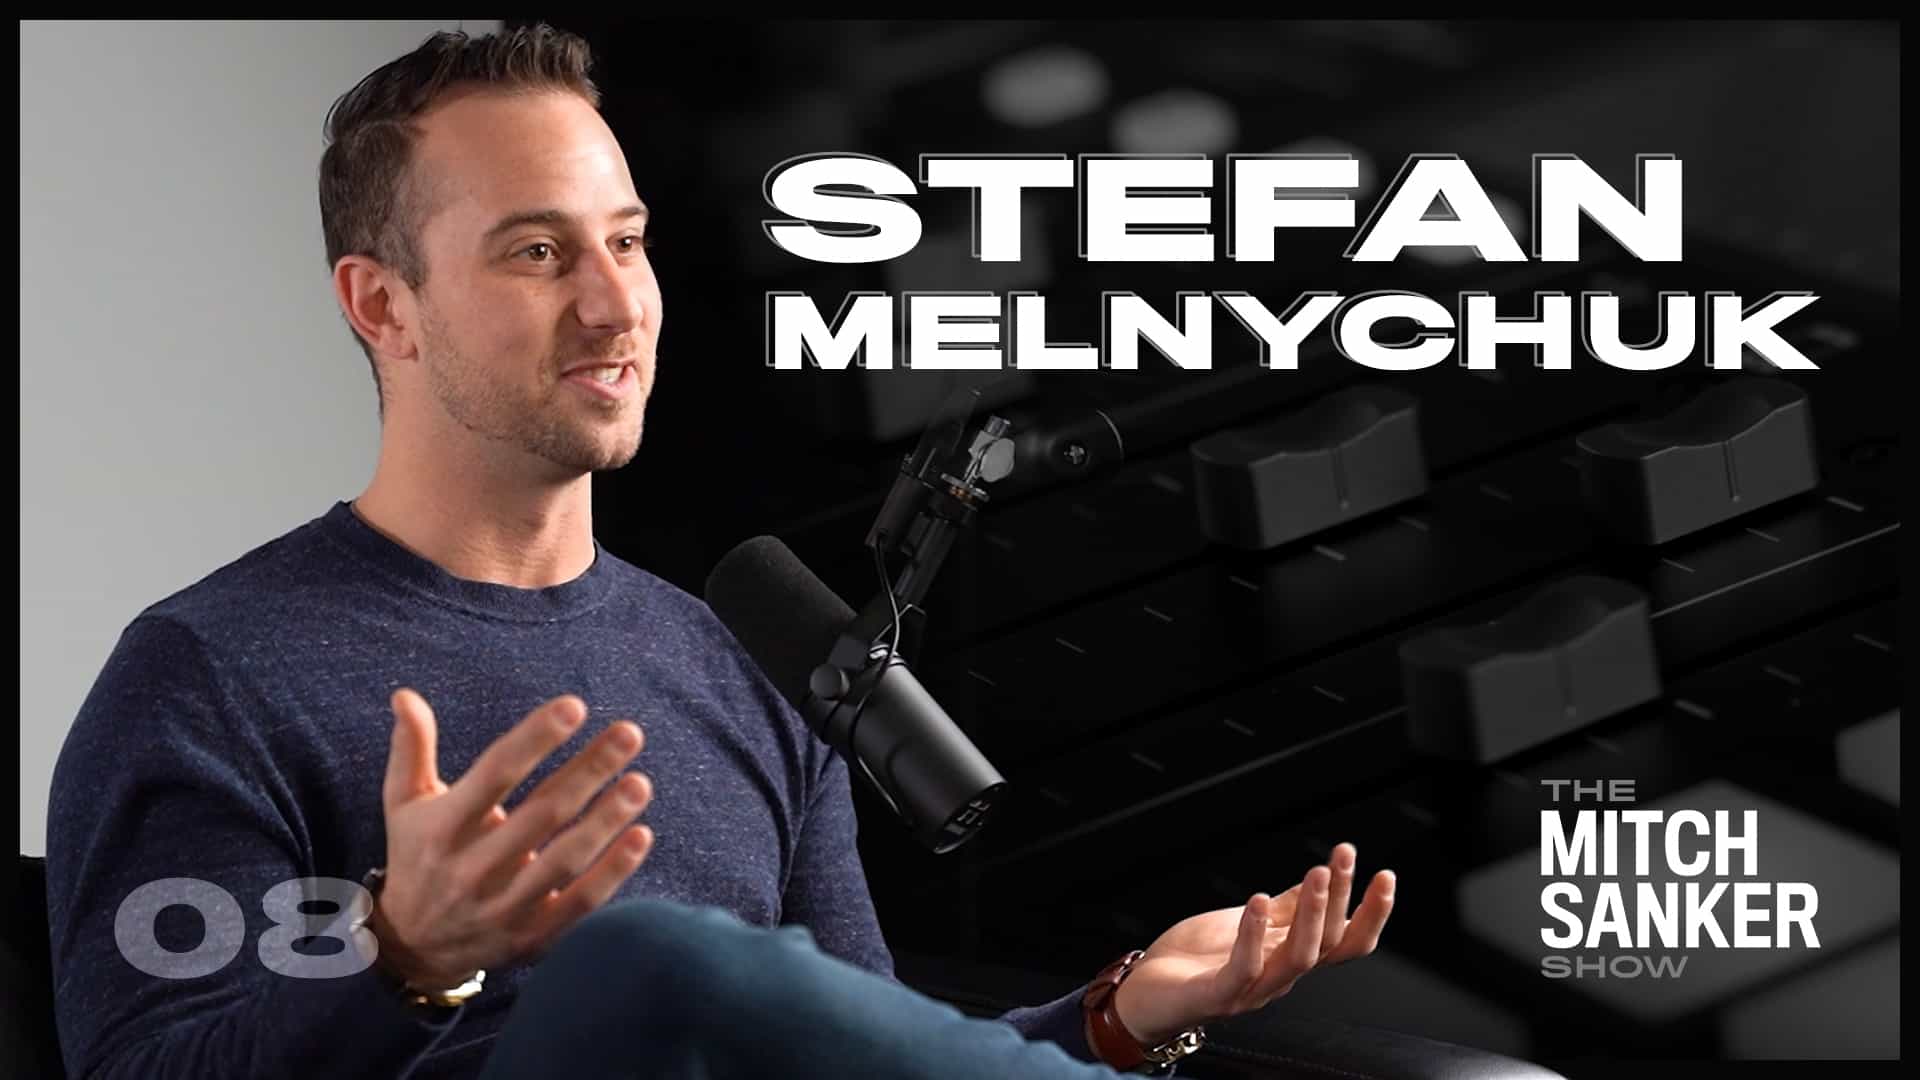 You are currently viewing The Mitch Sanker Show – Episode 08 featuring Stefan Melnychuk